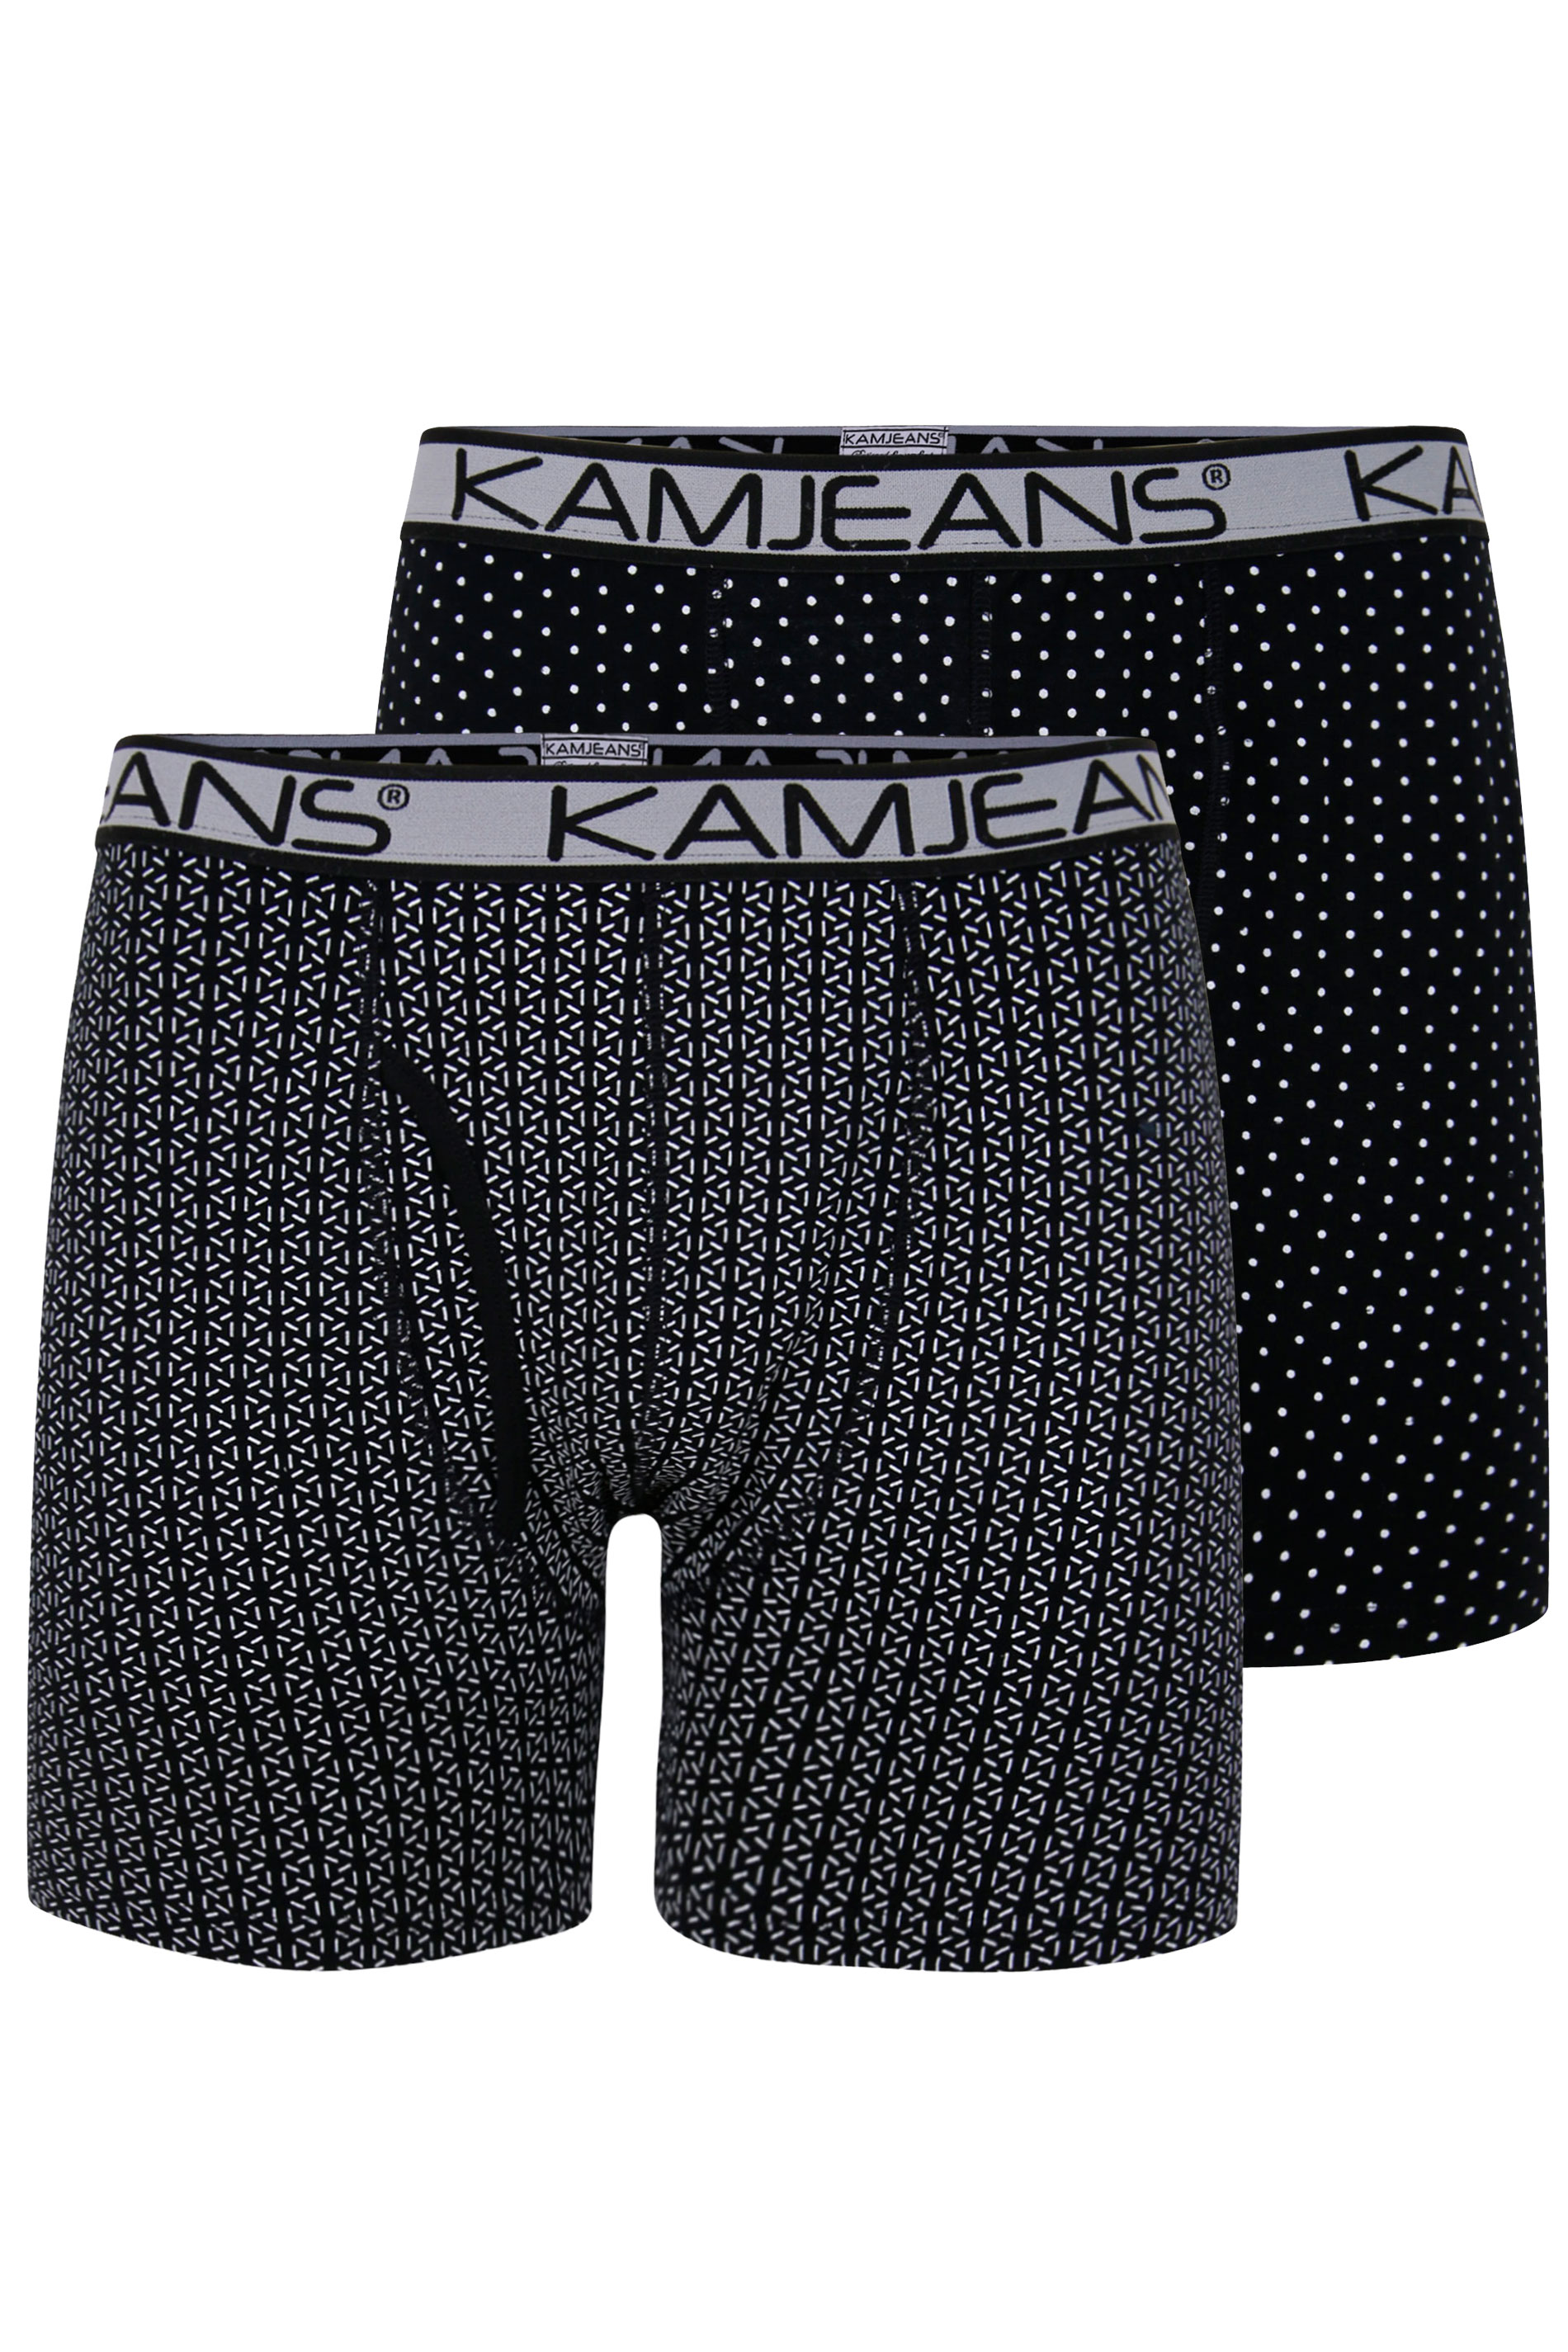 Mens  Big Tall Kam Jeans Stretch Boxer Shorts Underwear Trunks 2 Pack Size 2-8XL 